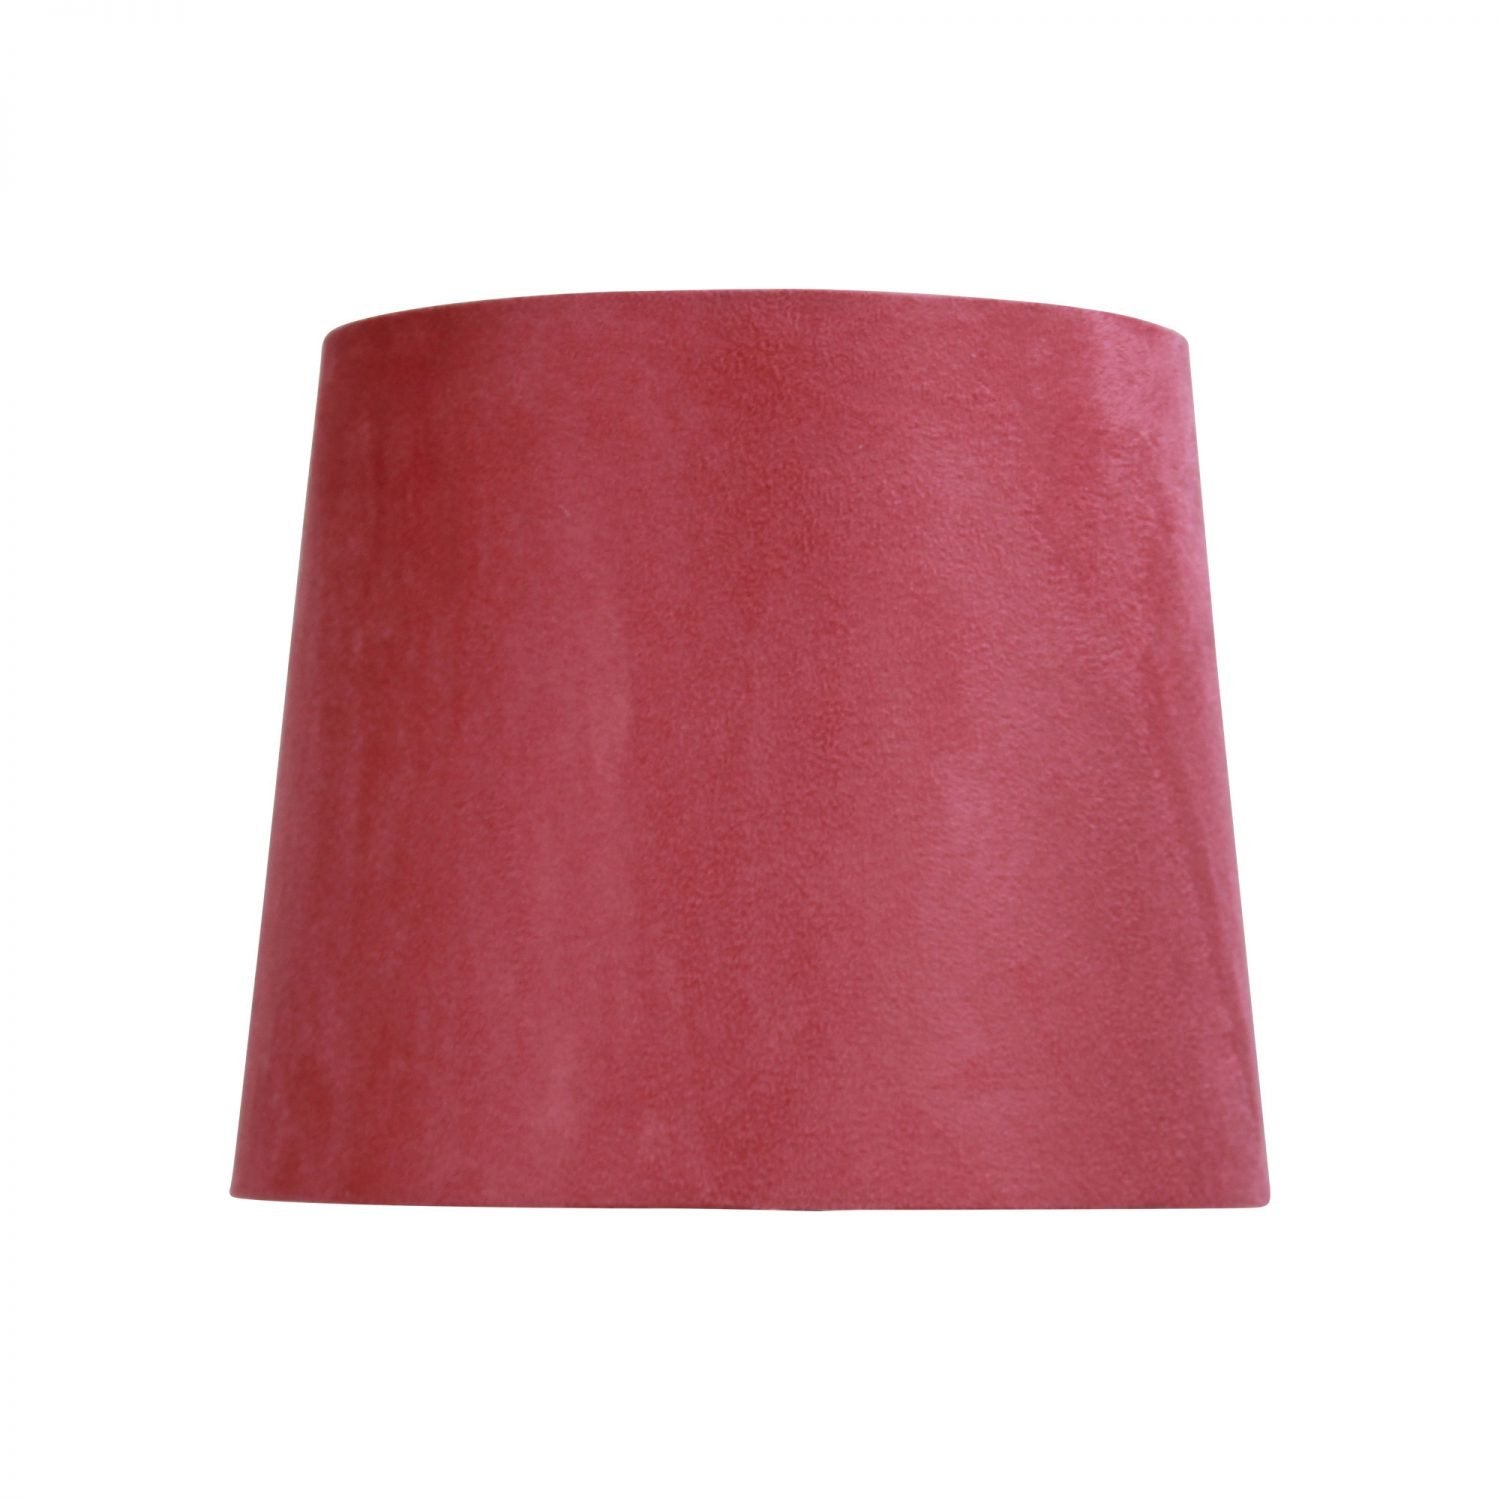 225-275-225mm / 11" Coral Pink Suede Shade E27 - OL91891